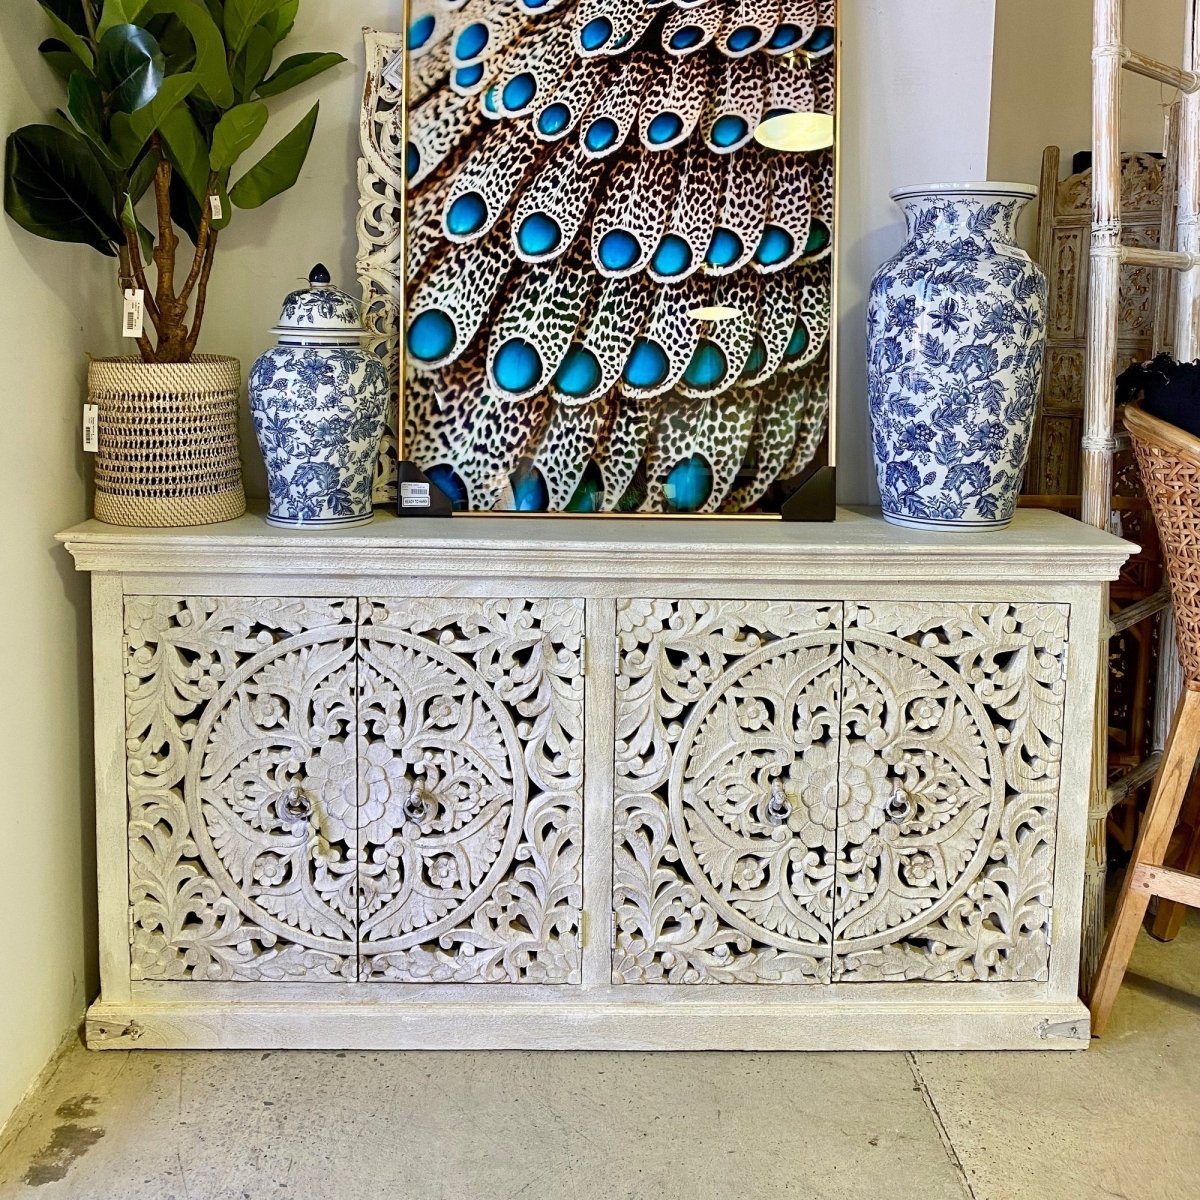 Hand Carved Wooden Chakra Pattern Sideboard With 4 doors | Antique Buffet Table Buffet & Sideboard - Bone Inlay Furnitures